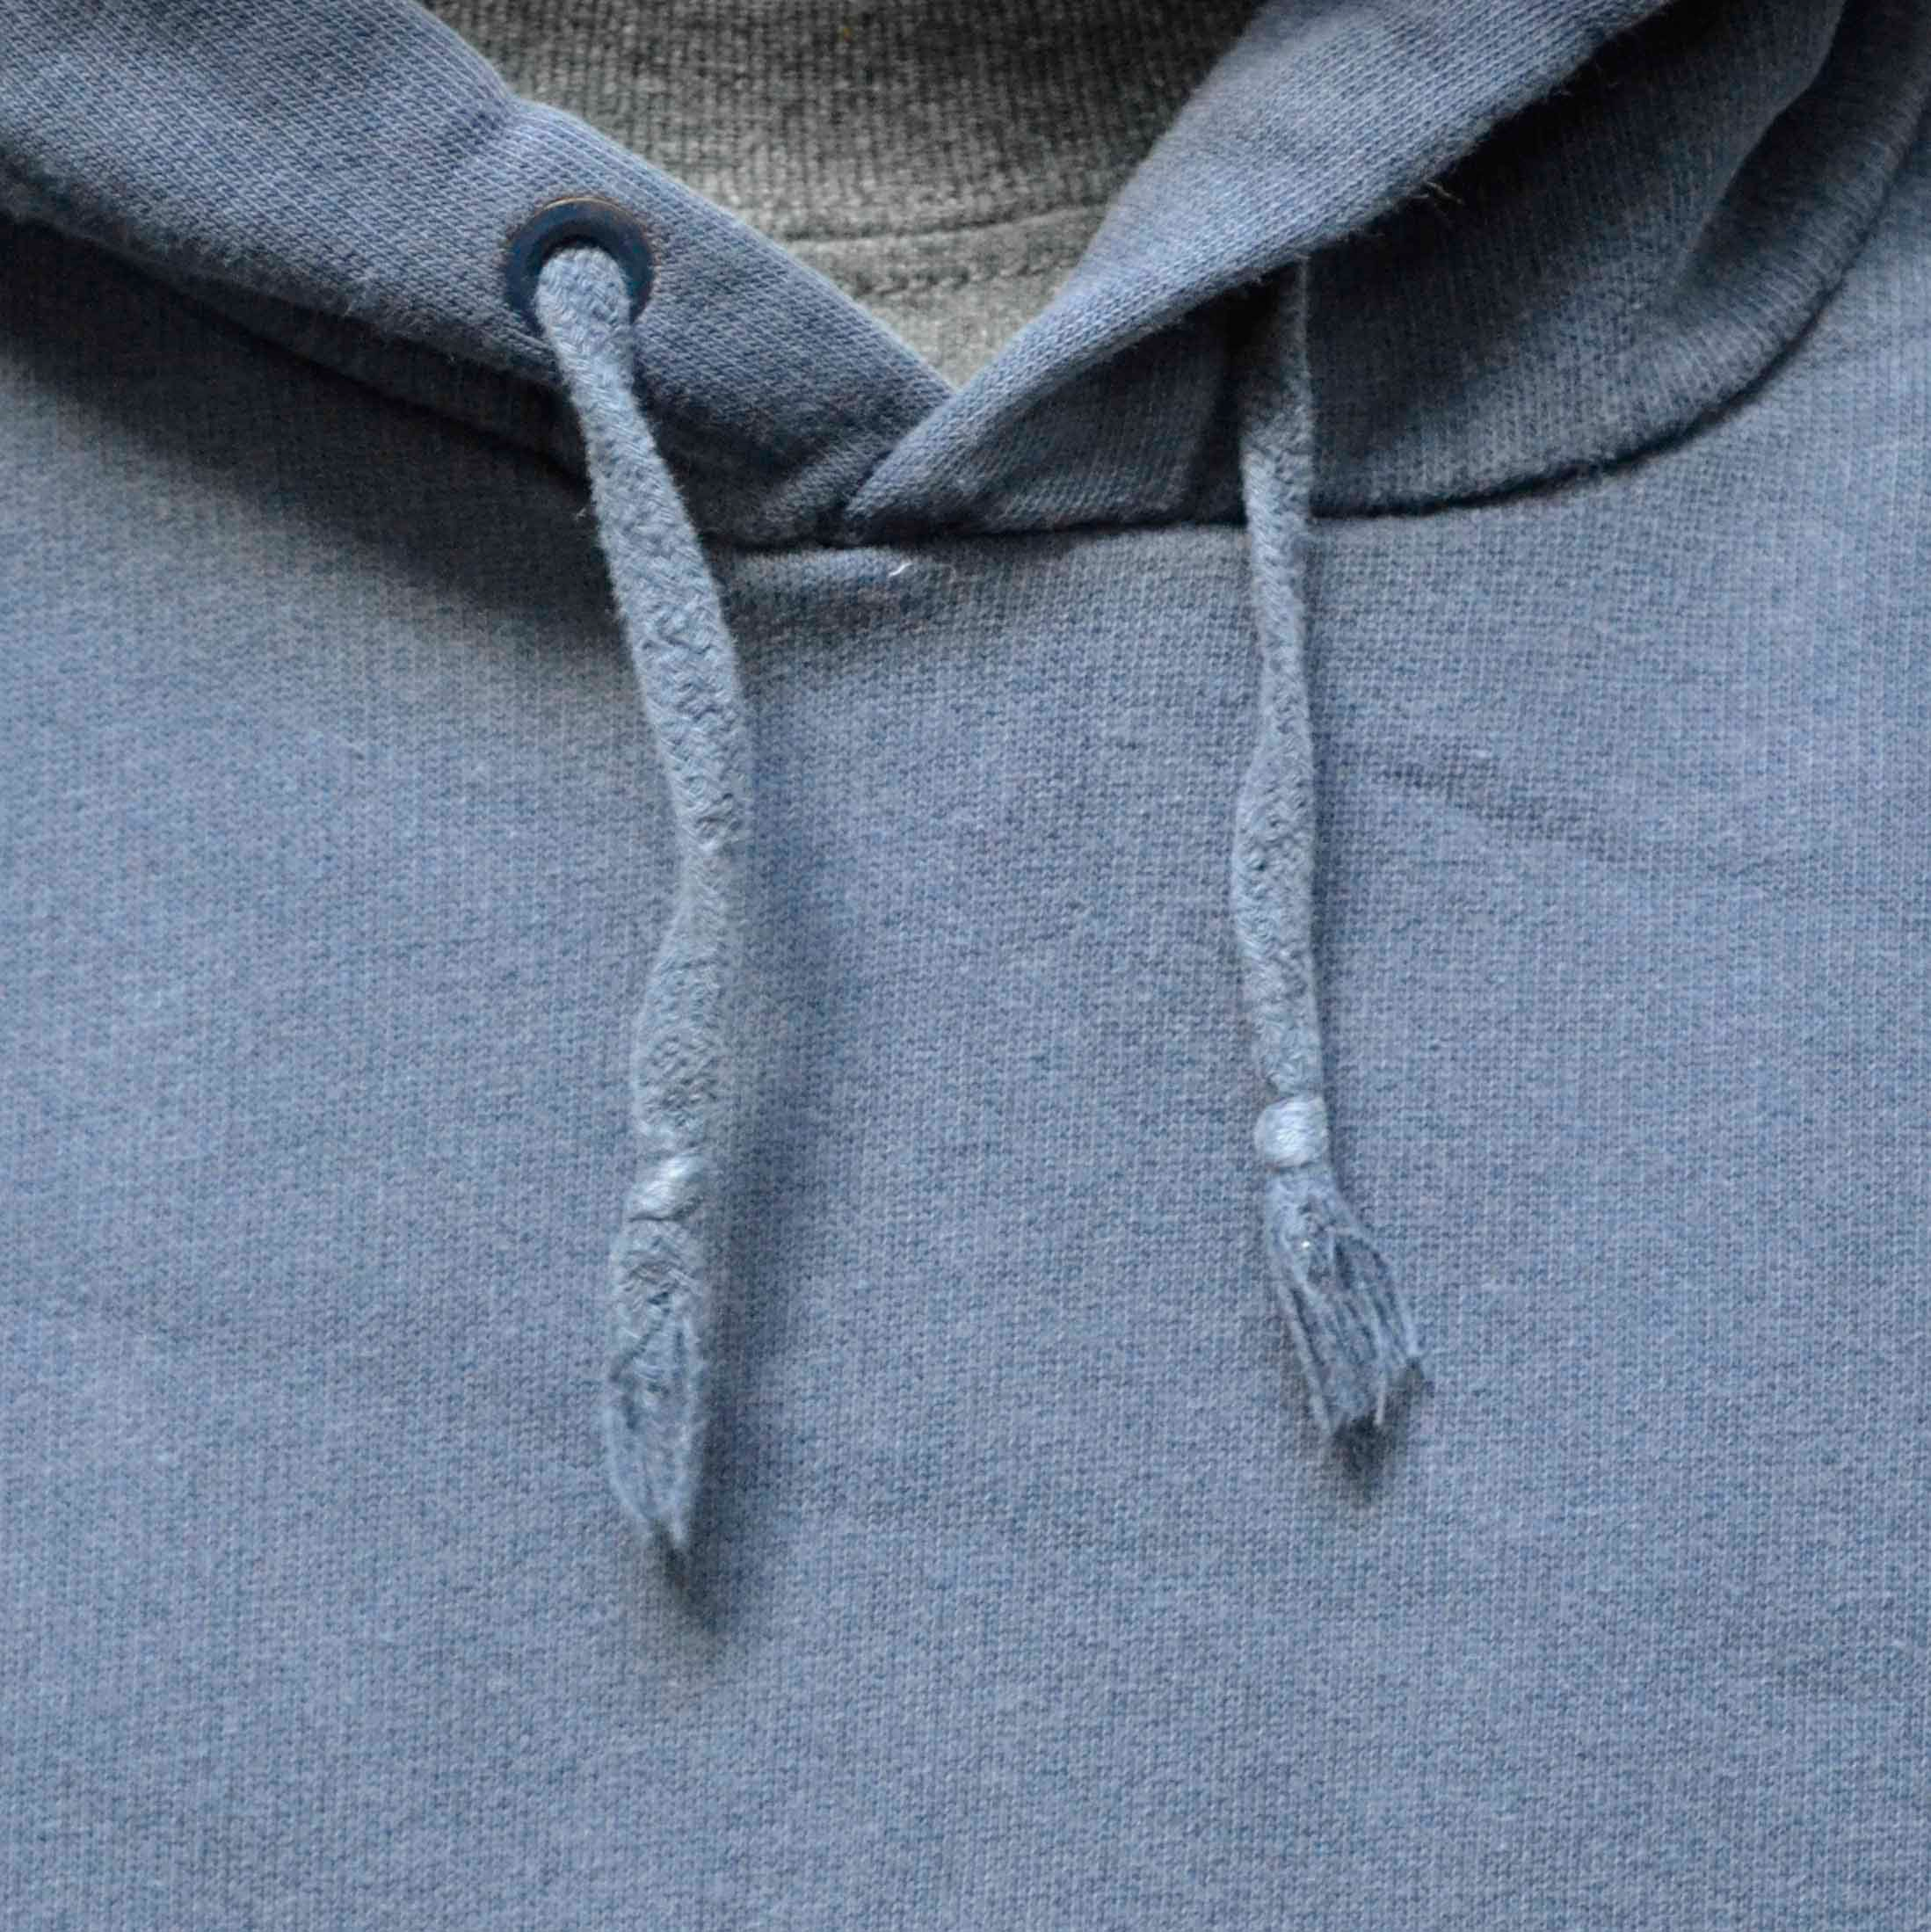 How Many Of These Sweatshirt Strings Have You Chewed On? - ClickHole